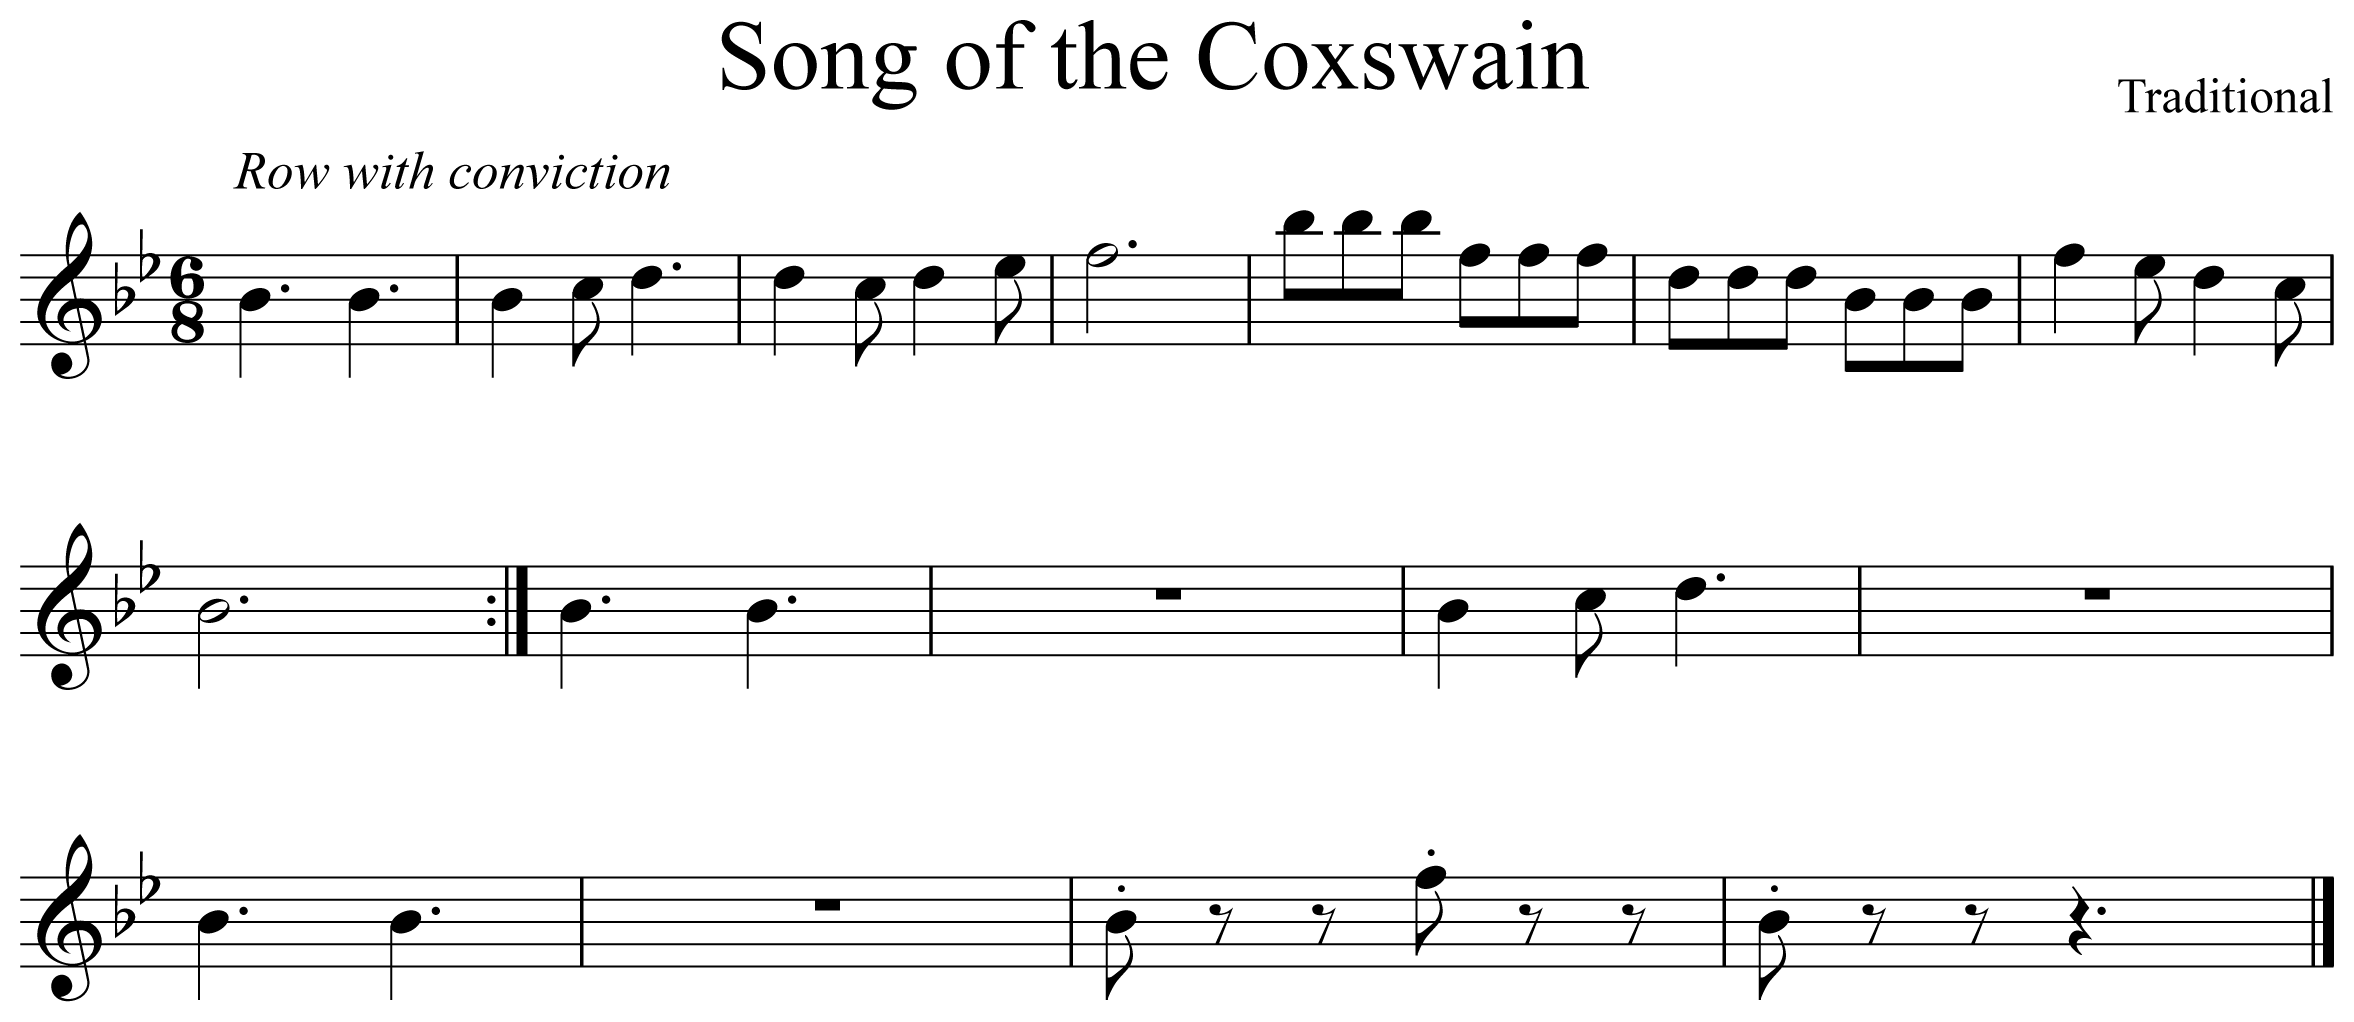 Song of the Coxswain Notation Flute